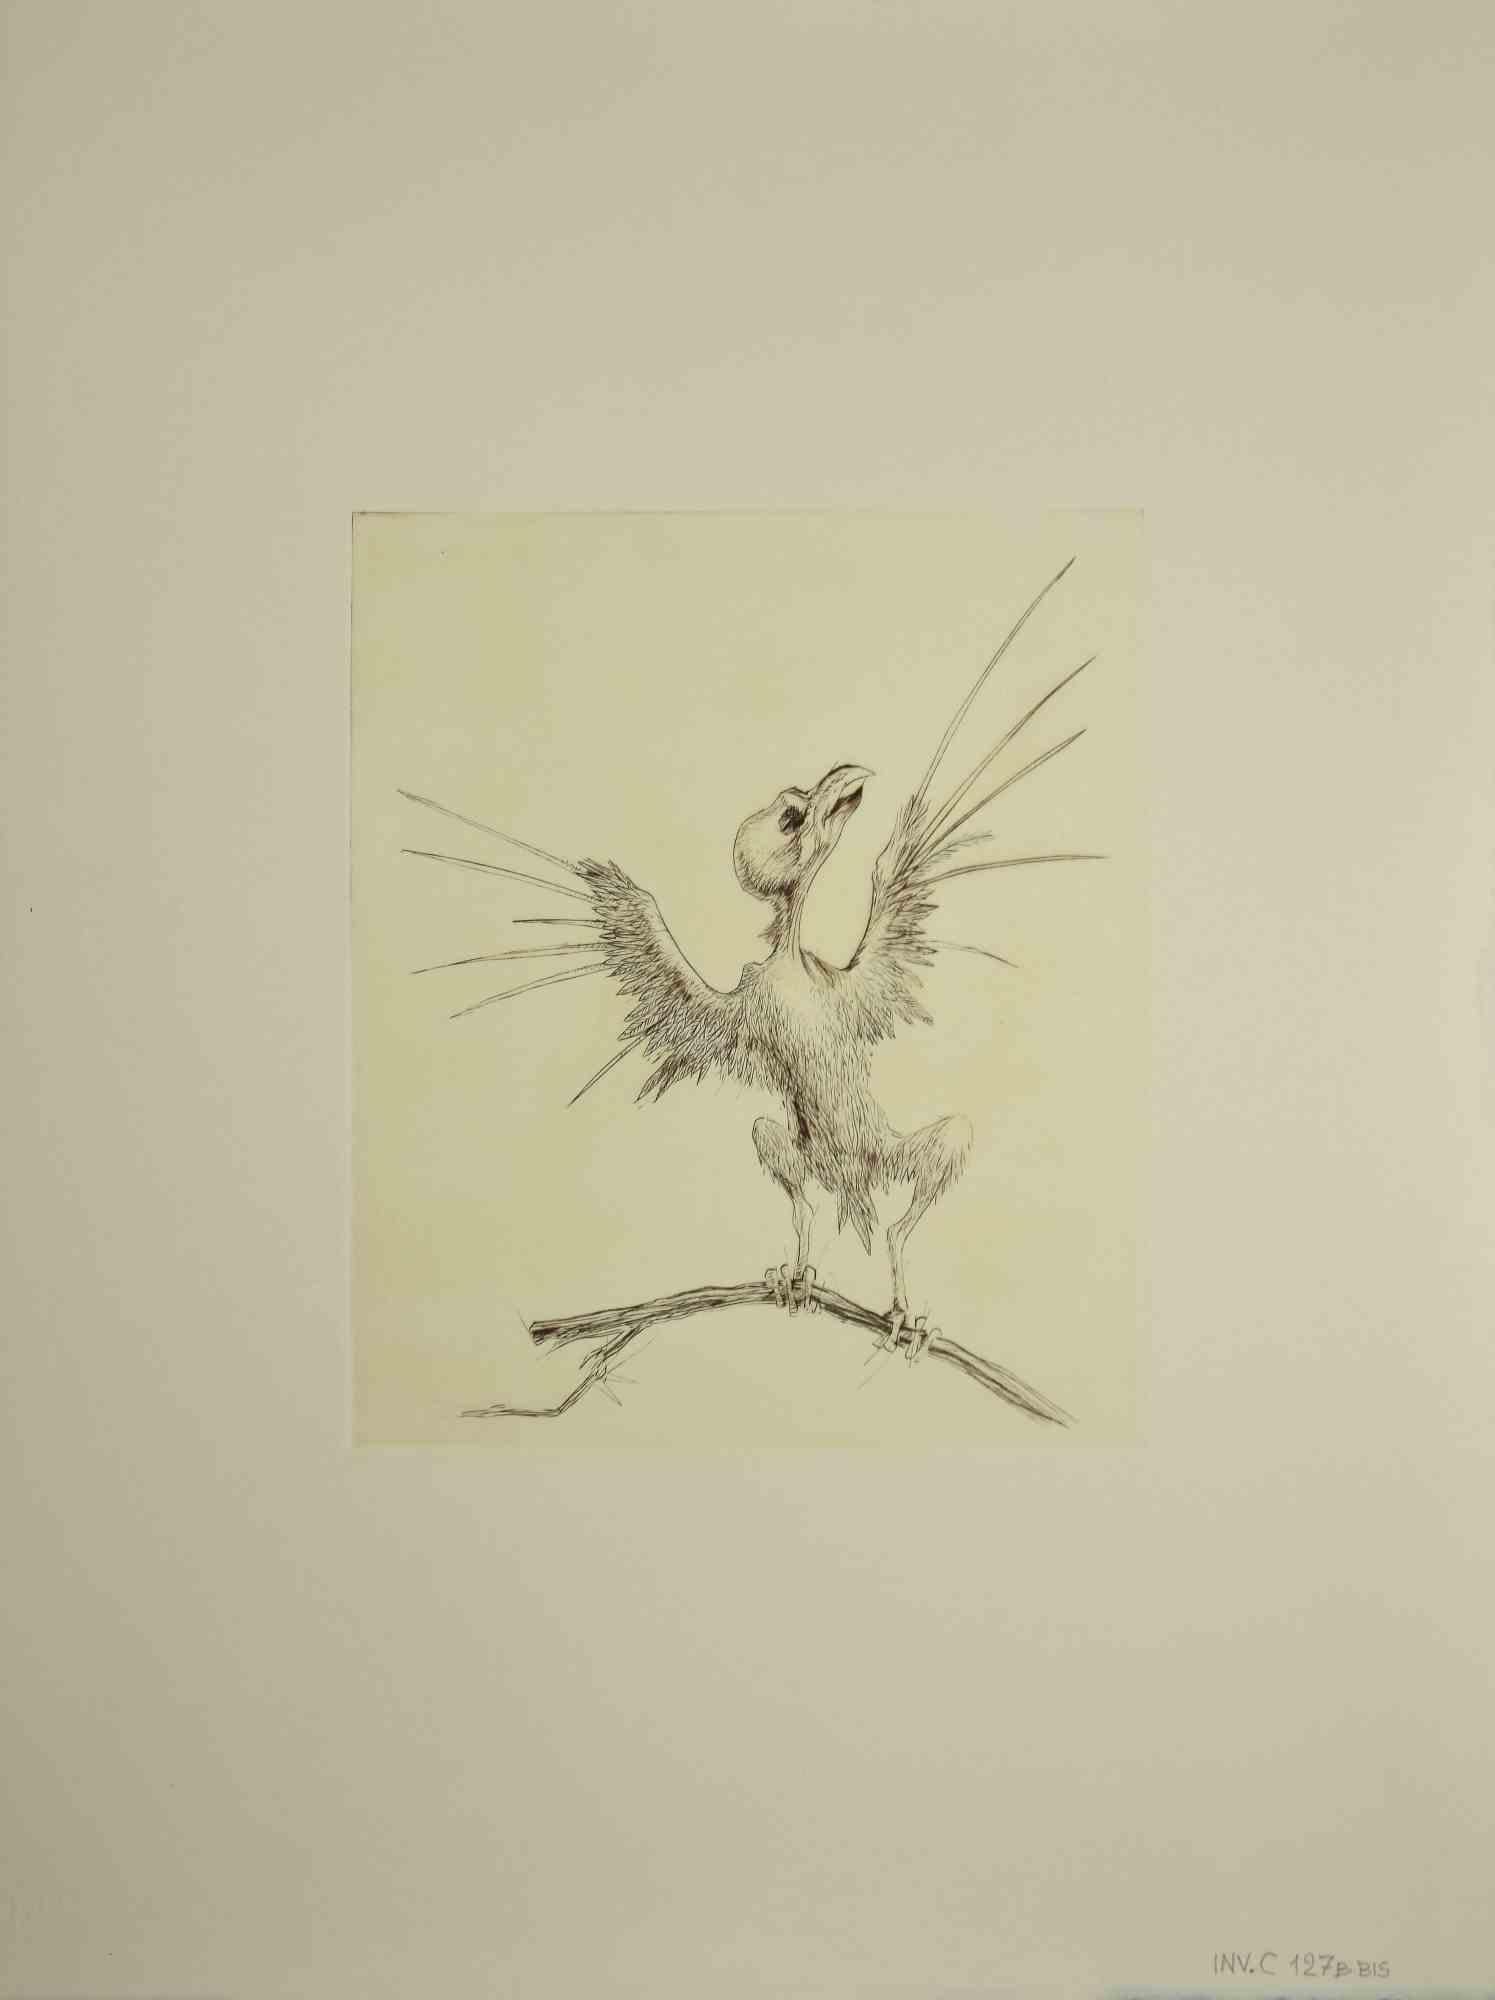 Bird is an original Contemporary artwork realized  in 1970  by the italian Contemporary artist  Leo Guida  (1992 - 2017).

Original black and white etching on ivory-colored cardboard.

Nicht unterzeichnet. 

In this artwork is represented a bird.